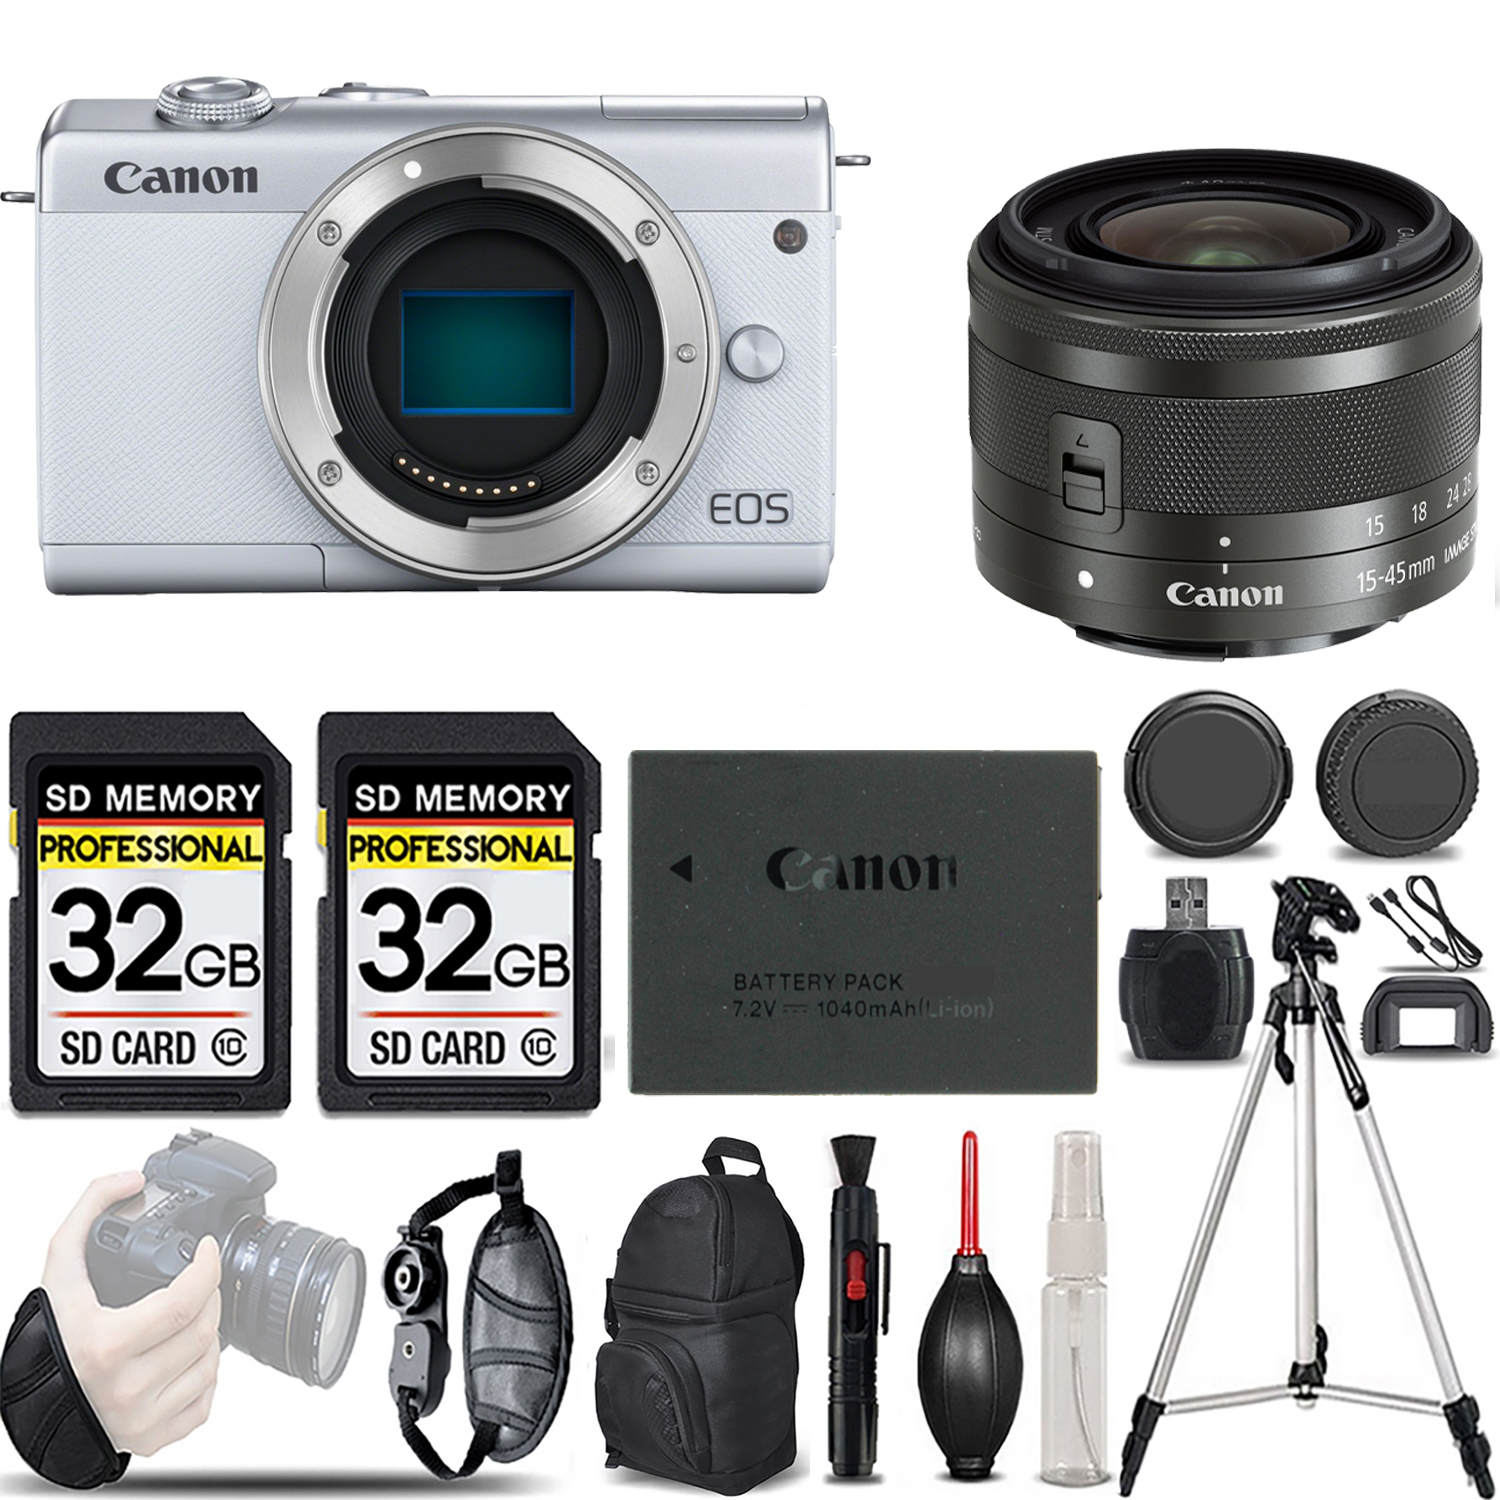 EOS M200  Camera (White) + 15-45mm IS STM Lens (Graphite) - LOADED KIT *FREE SHIPPING*